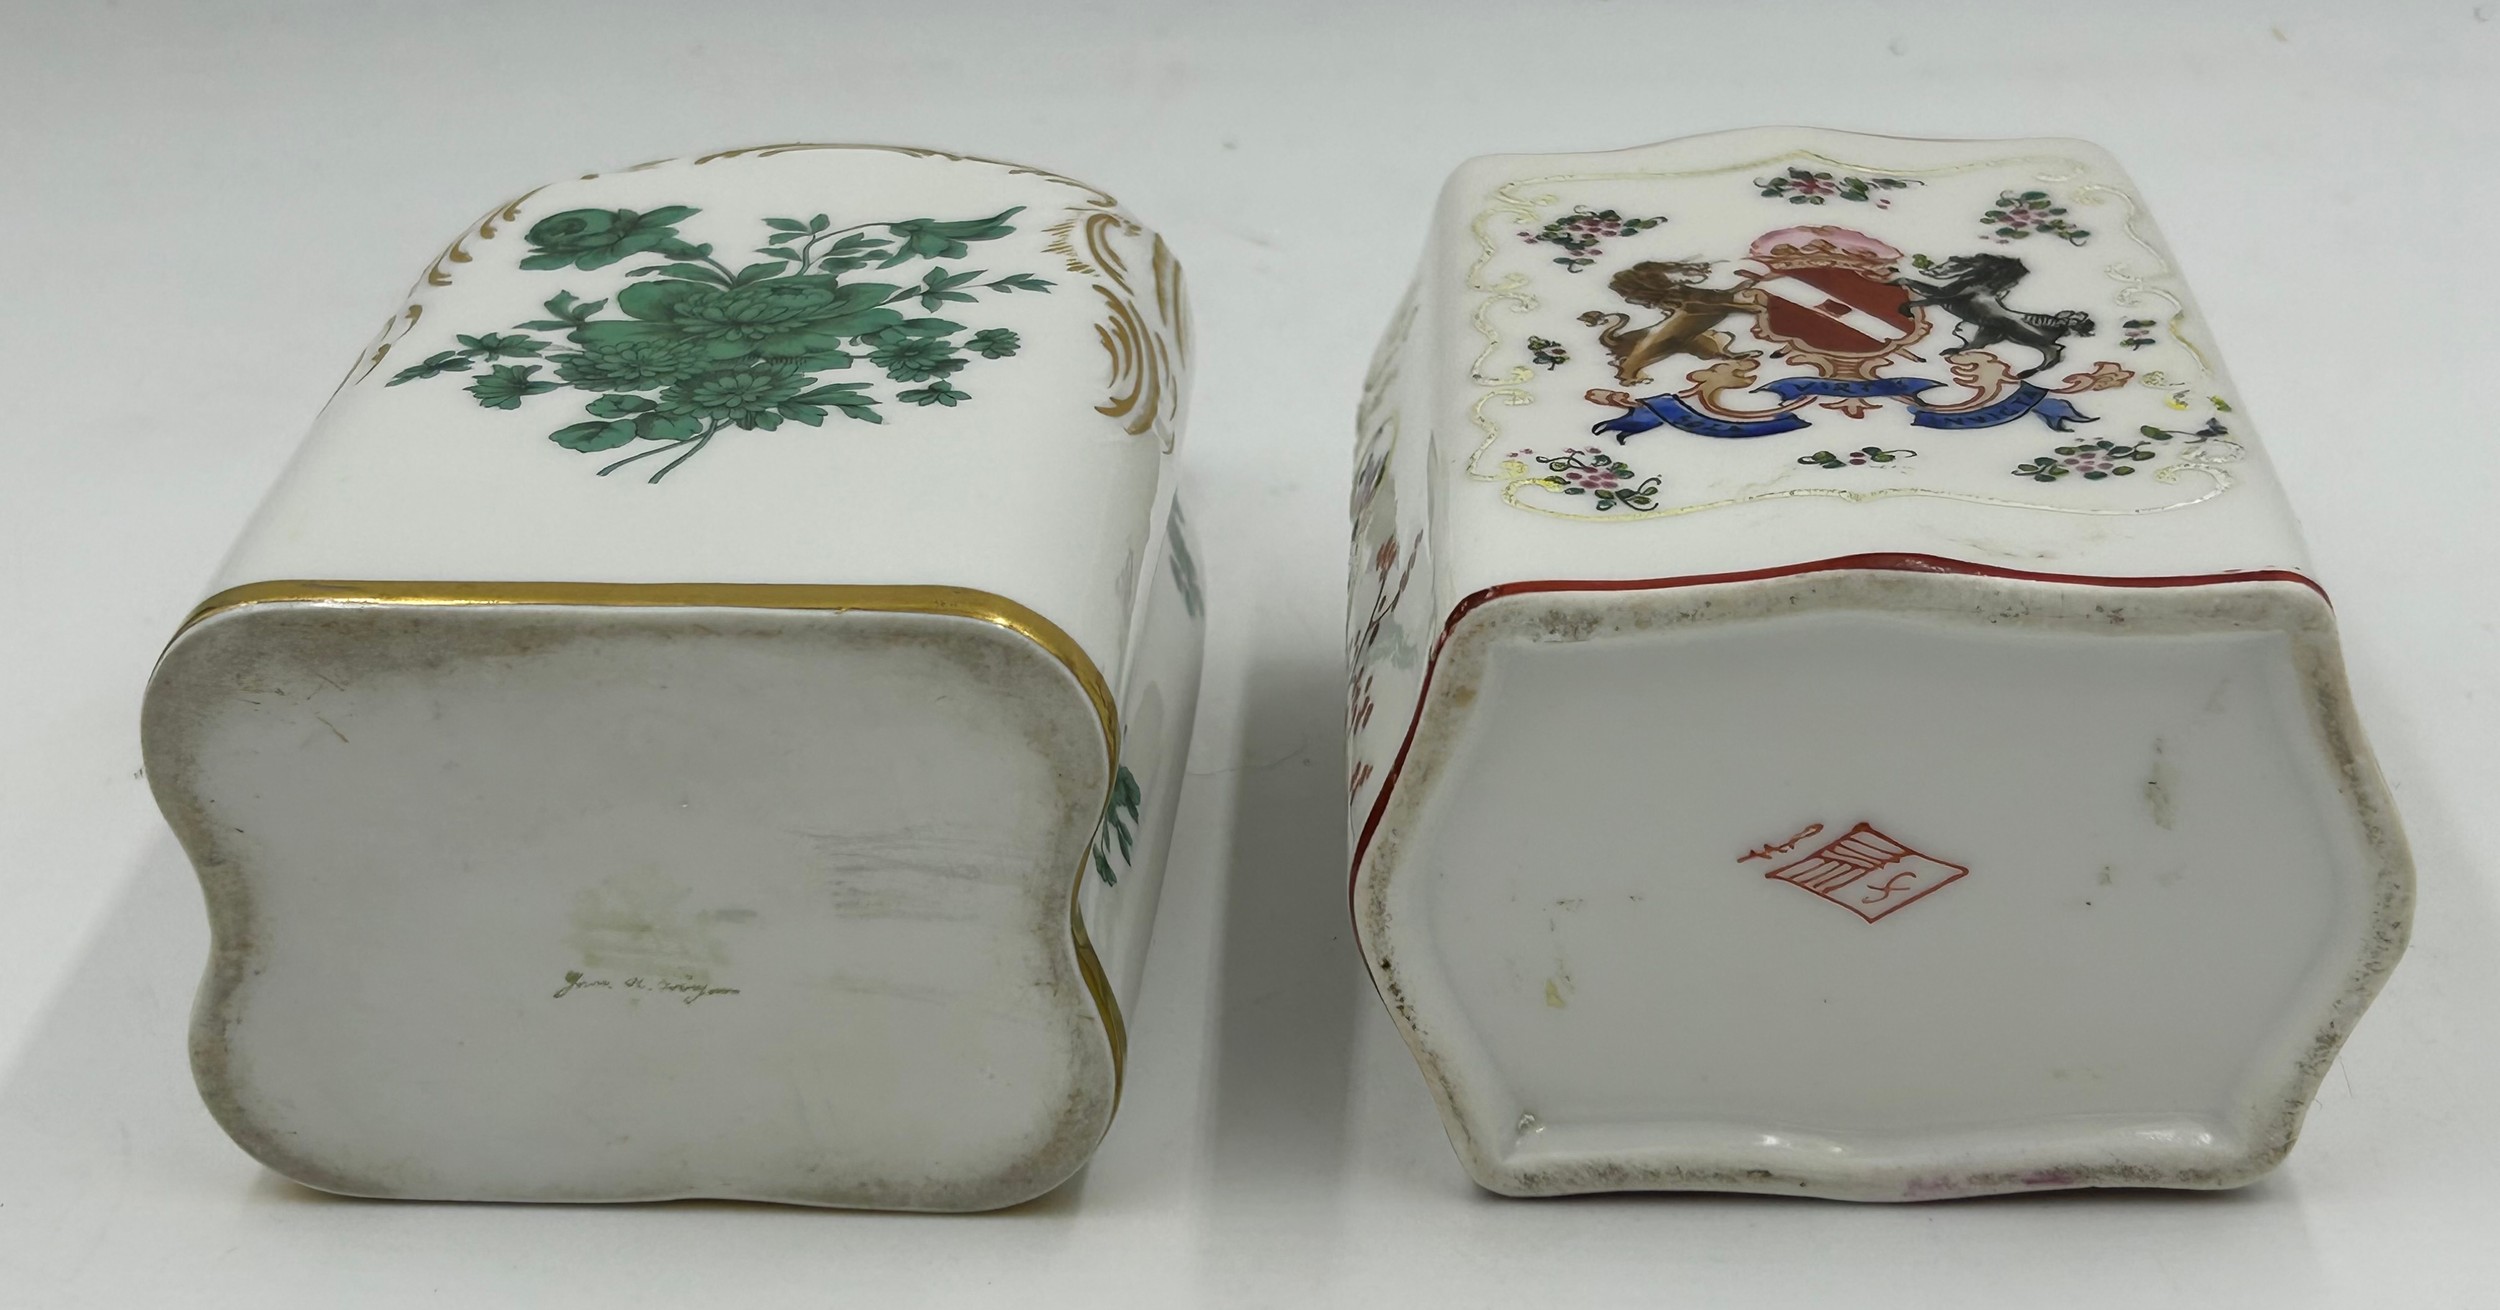 Two 19th century Porcelain Tea Caddies by Samson of Paris, one with armorial crest, one with - Image 5 of 5